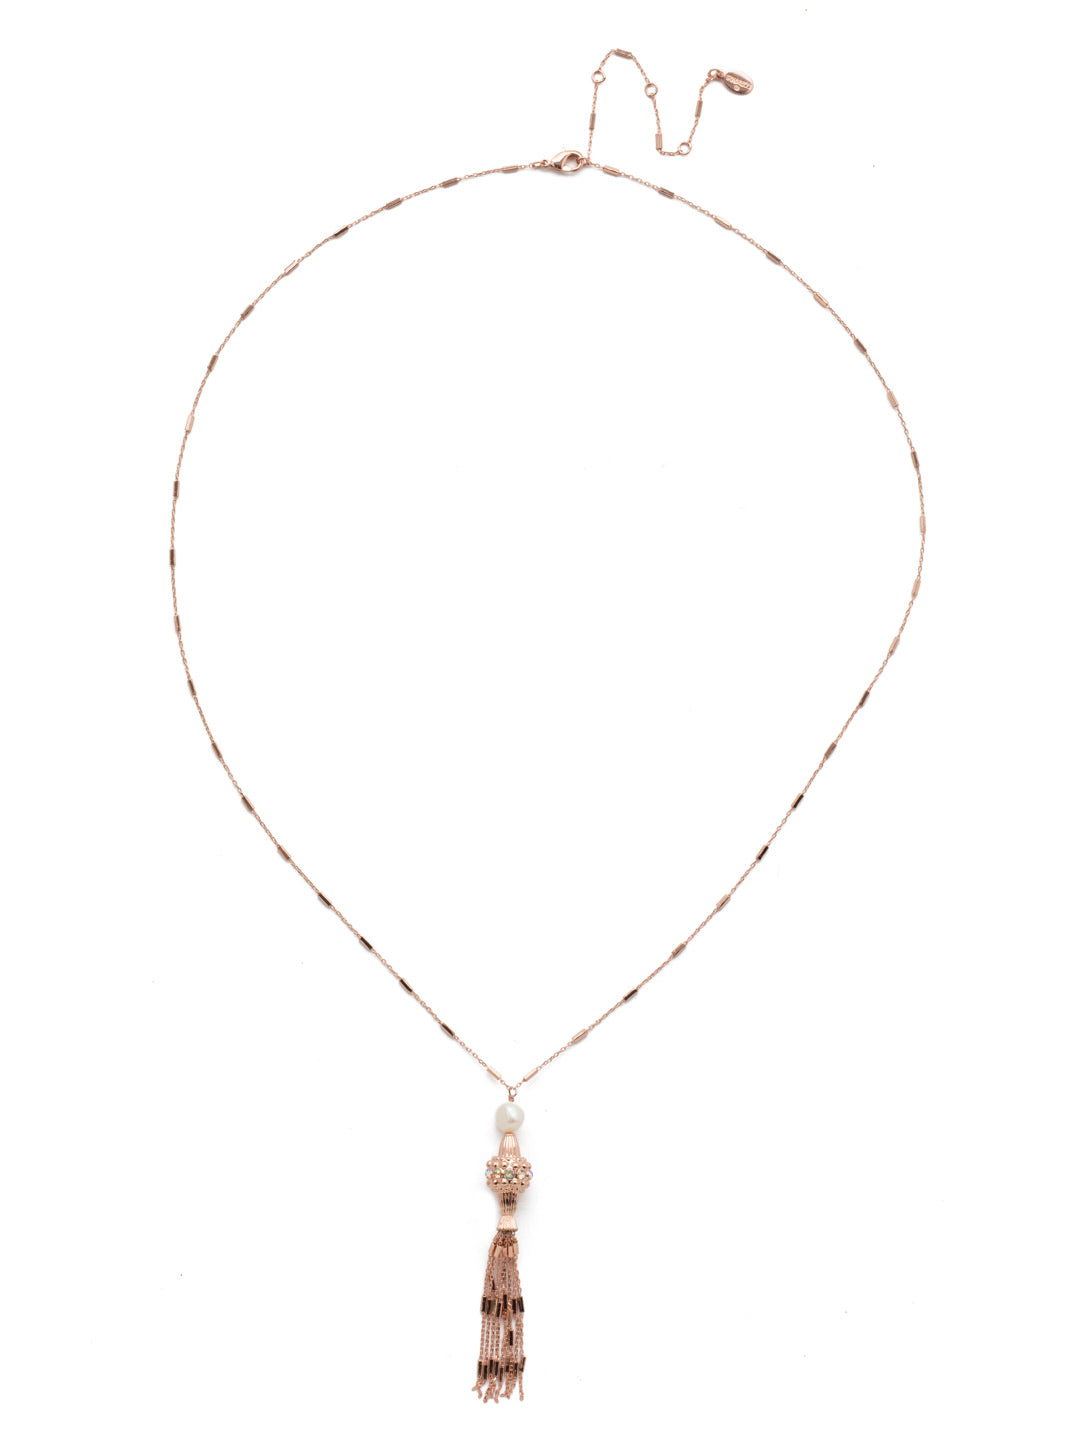 Joyelle Pendant Necklace - NEA42RGROG - <p>This long strand necklace features a purposefully placed pearl atop an intricate metal element. This design is further enhanced by a delicate, free flowing multi-strand tassel. From Sorrelli's Rose Garden  collection in our Rose Gold-tone finish.</p>